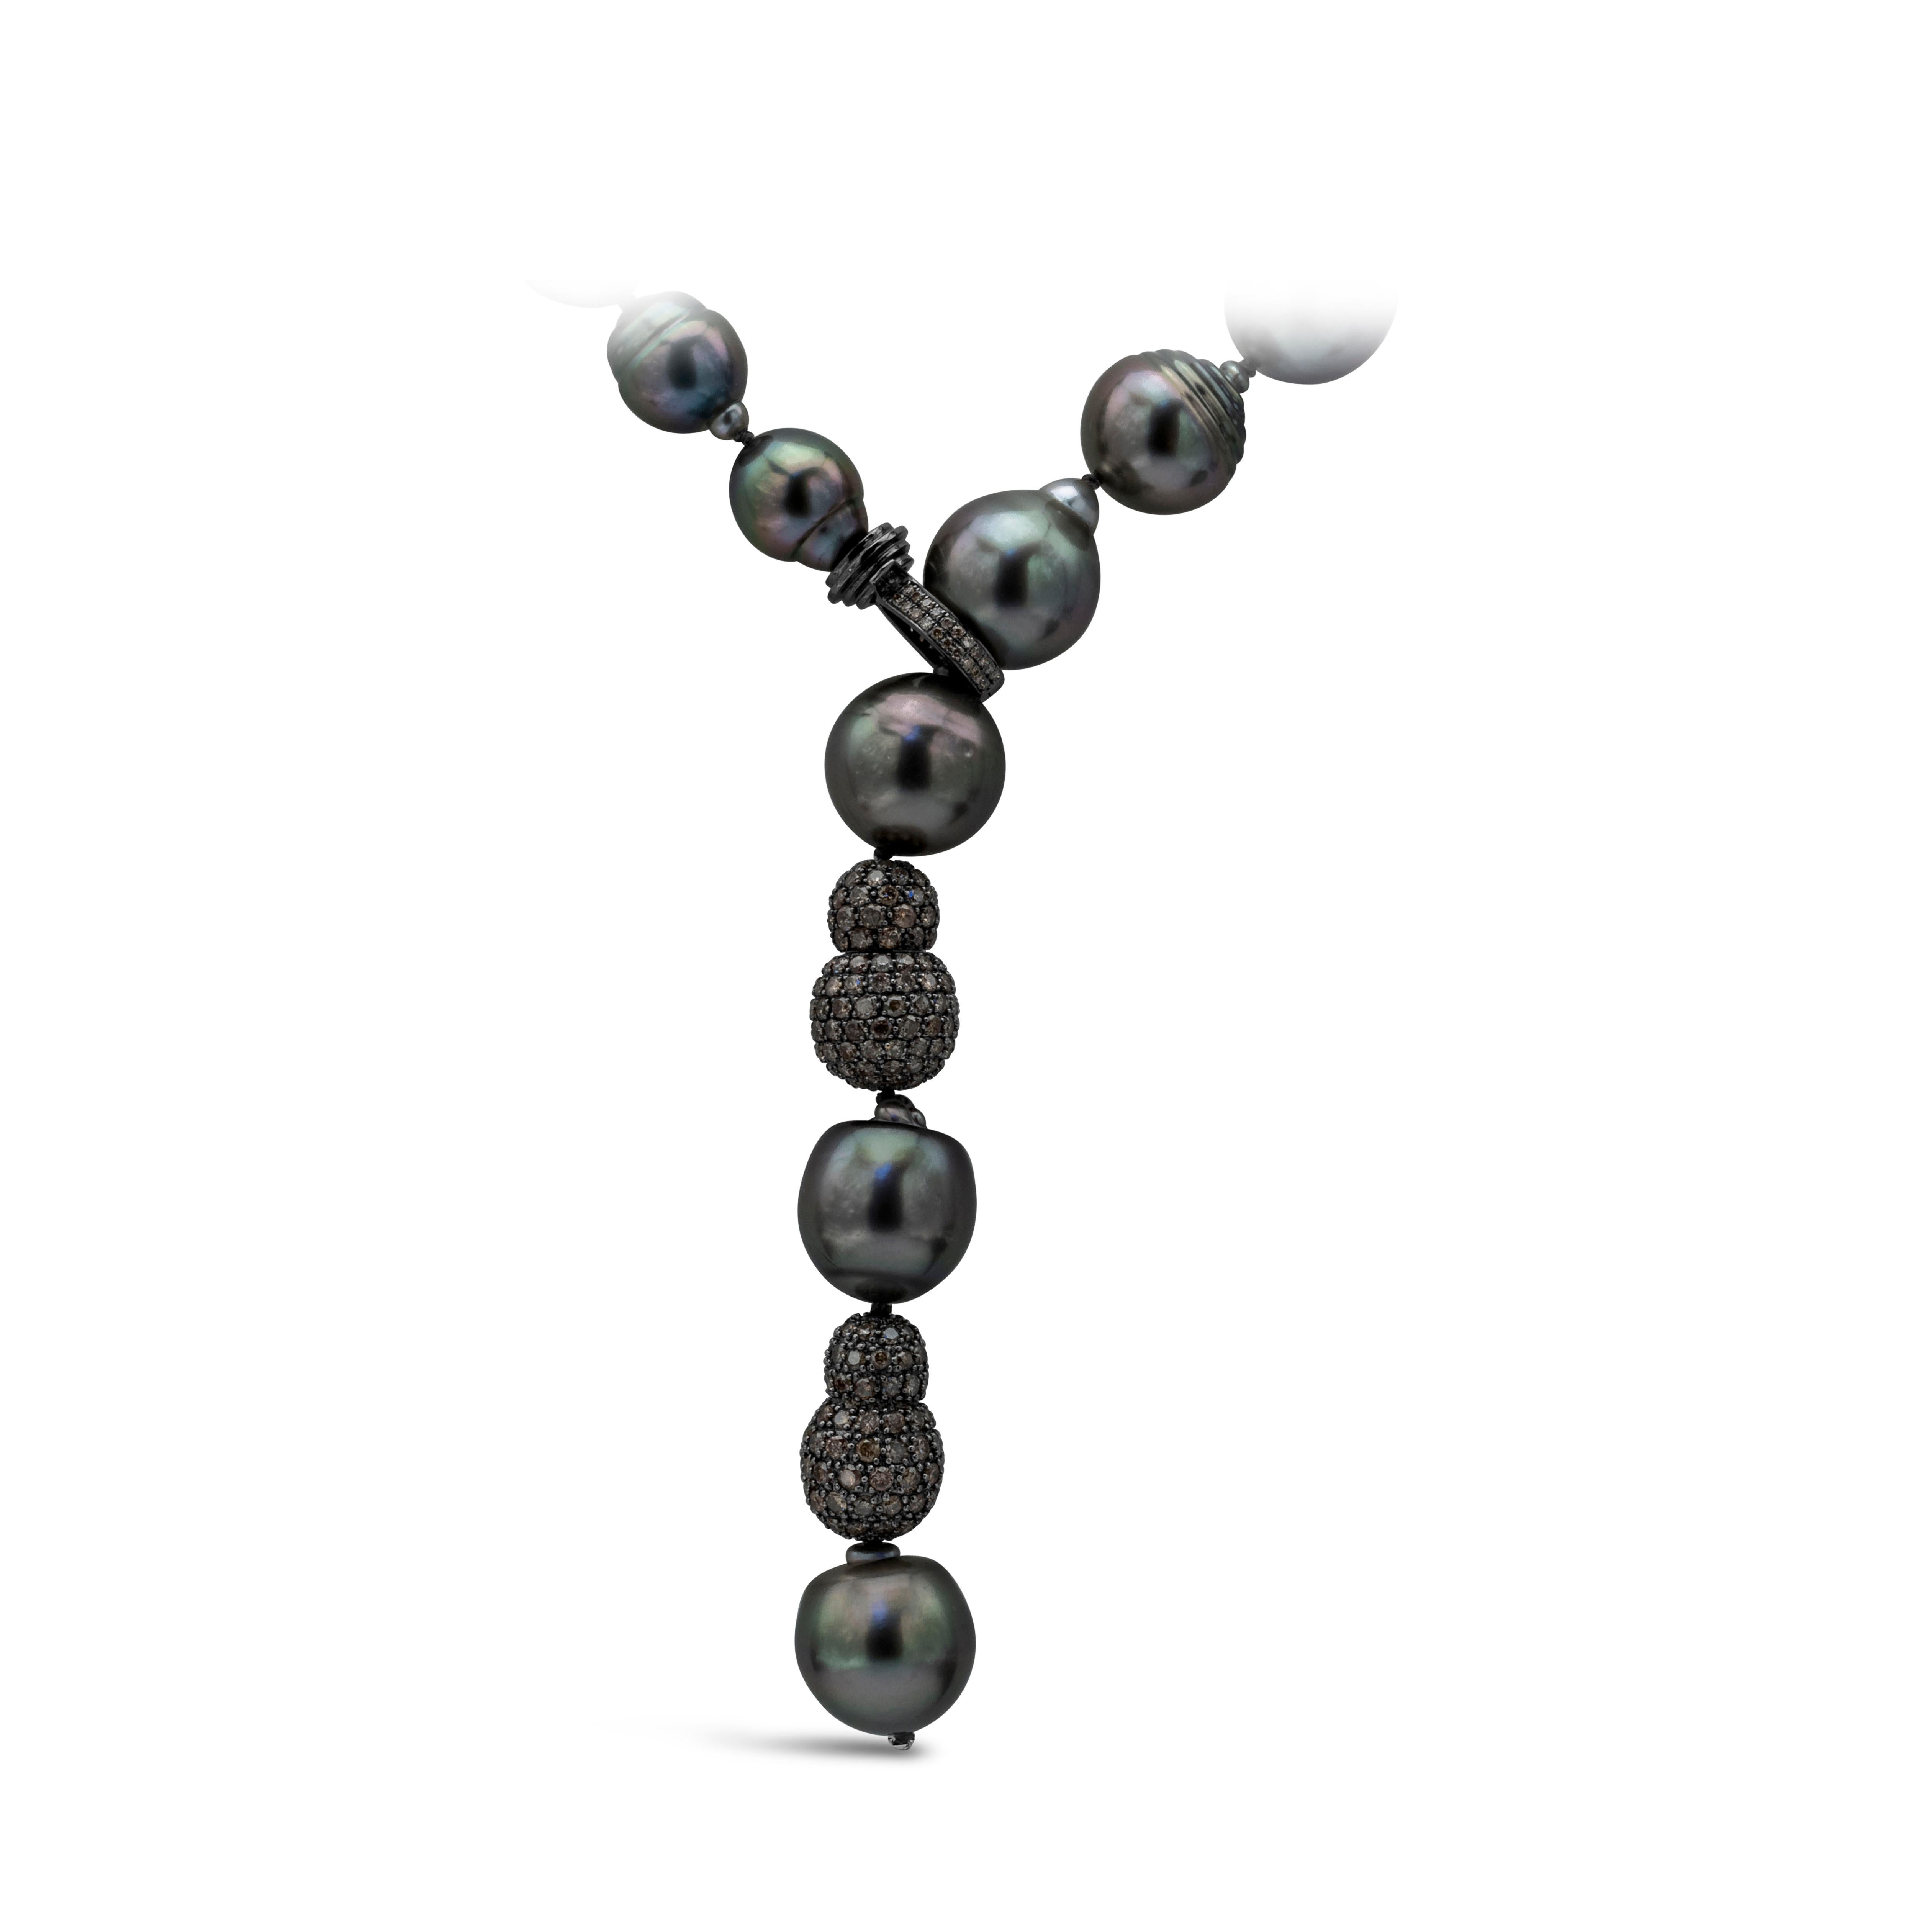 A beautiful pearl necklace showcasing 10-13.7mm baroque tahitian black pearl with diamond clasp, and features 2 diamond encrusted balls. Diamond weigh 4.00 carats total. Made in 18K Black Rhodium.

Style available with matching earrings.